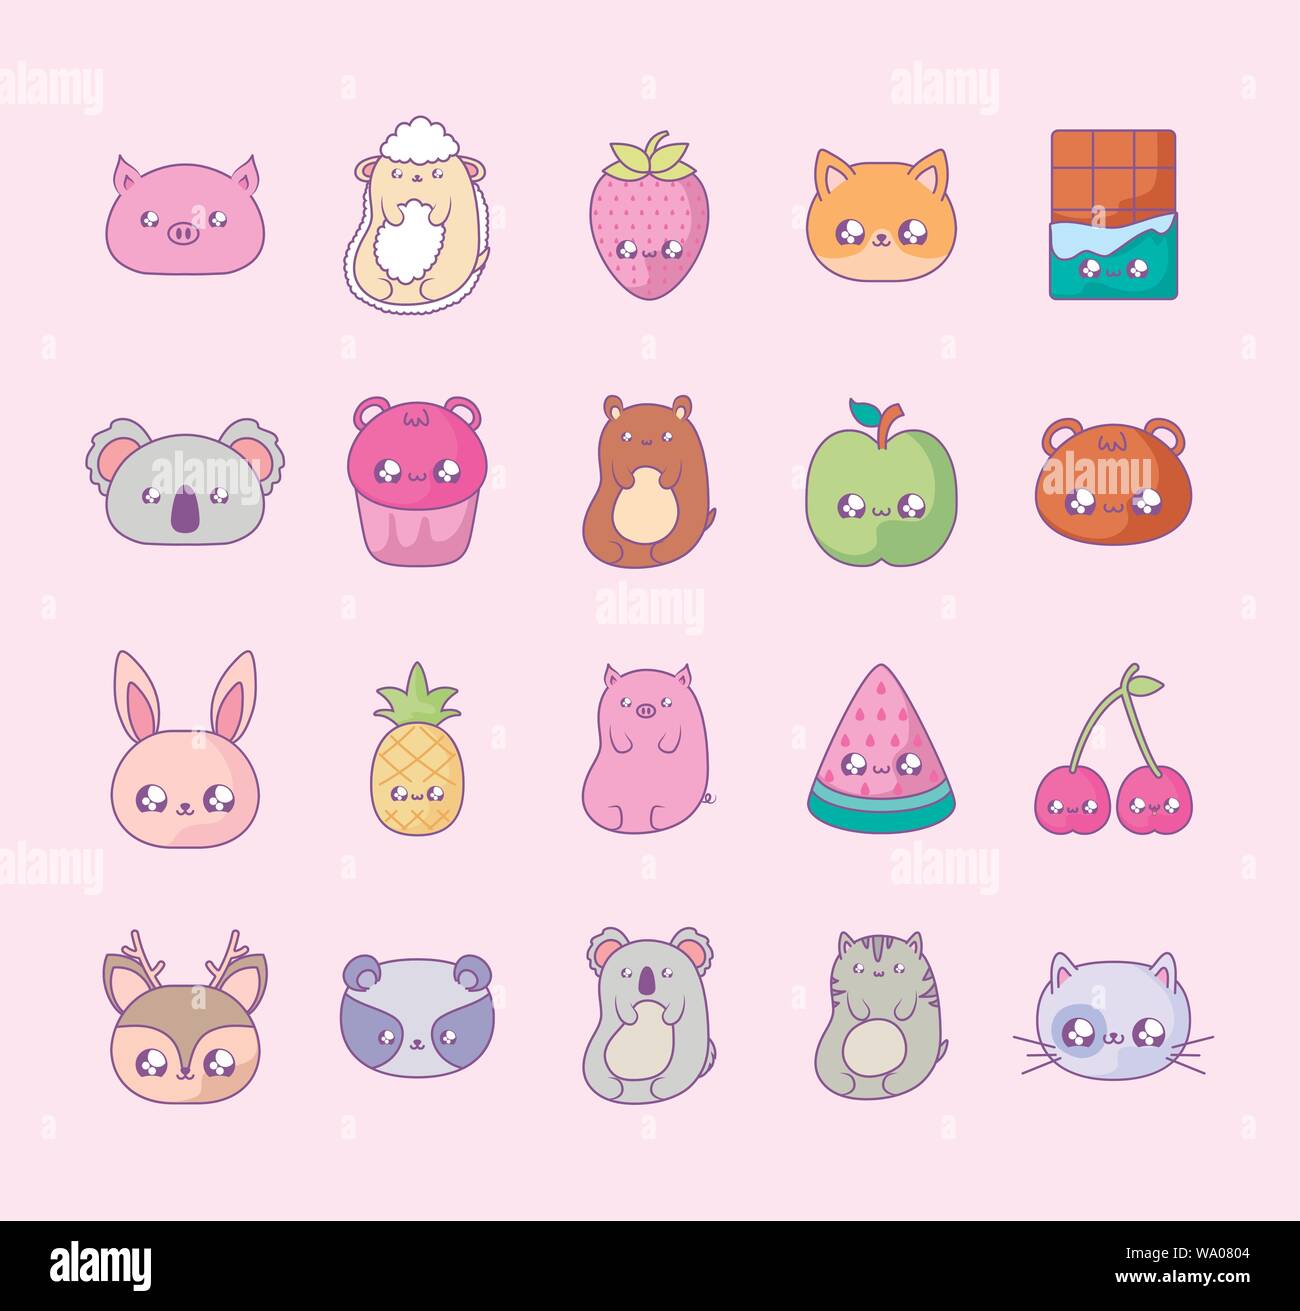 Set of Kawaii Icon in Doodle Style Illustration, Cute Sticker Collection  Stock Vector